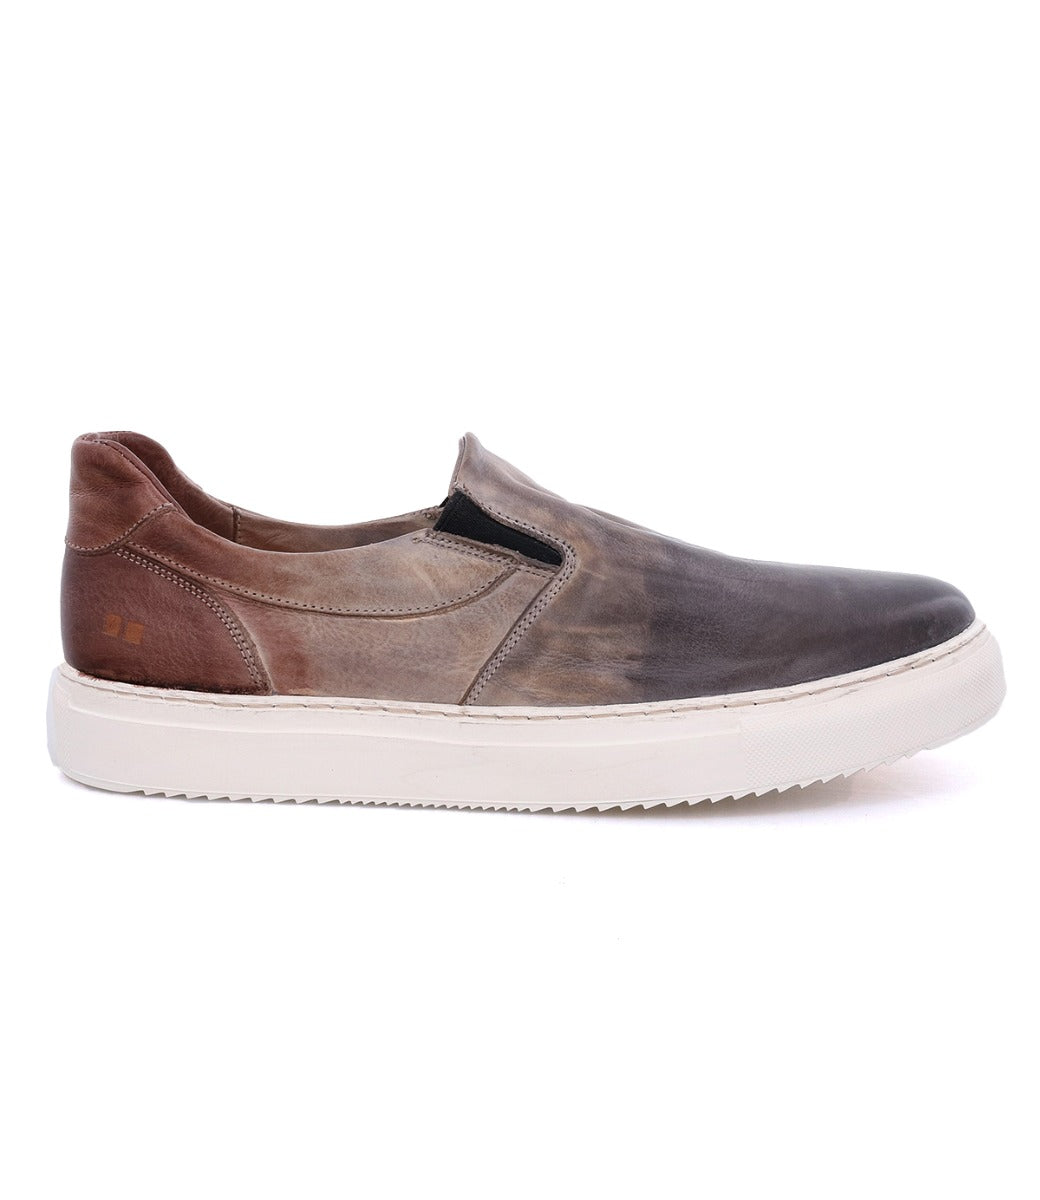 The Harry slip-on sneakers for men by Bed Stu are brown and white.